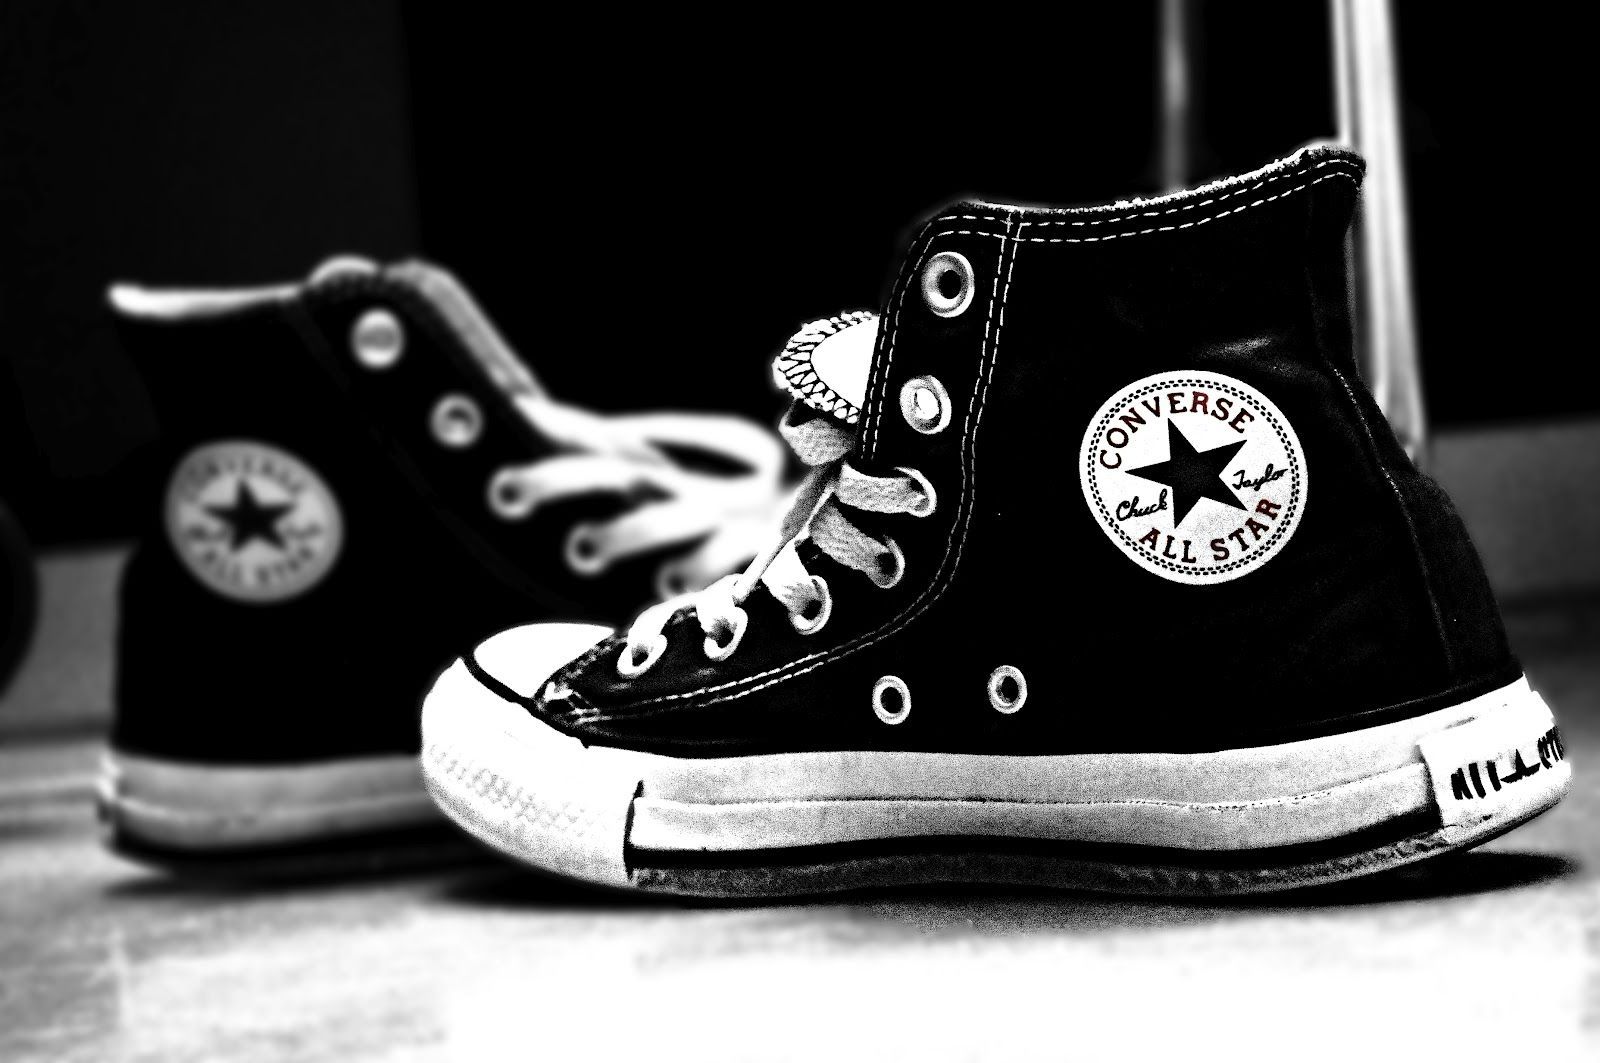 Black and White Converse Wallpaper Free Black and White Converse Background